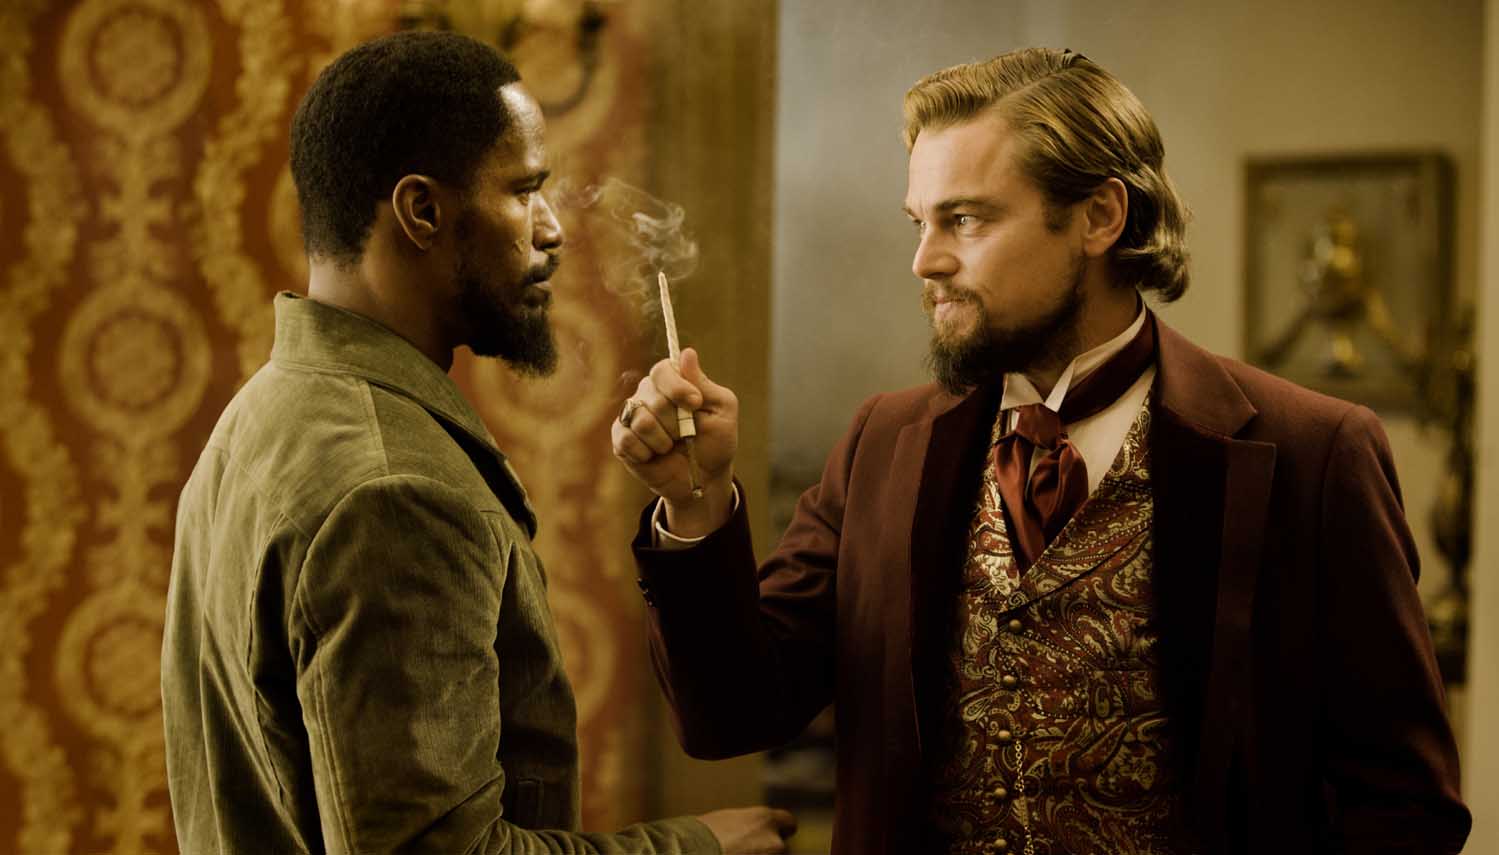 Quentin Tarantino sued for allegedly stealing ‘Django Unchained’ plot